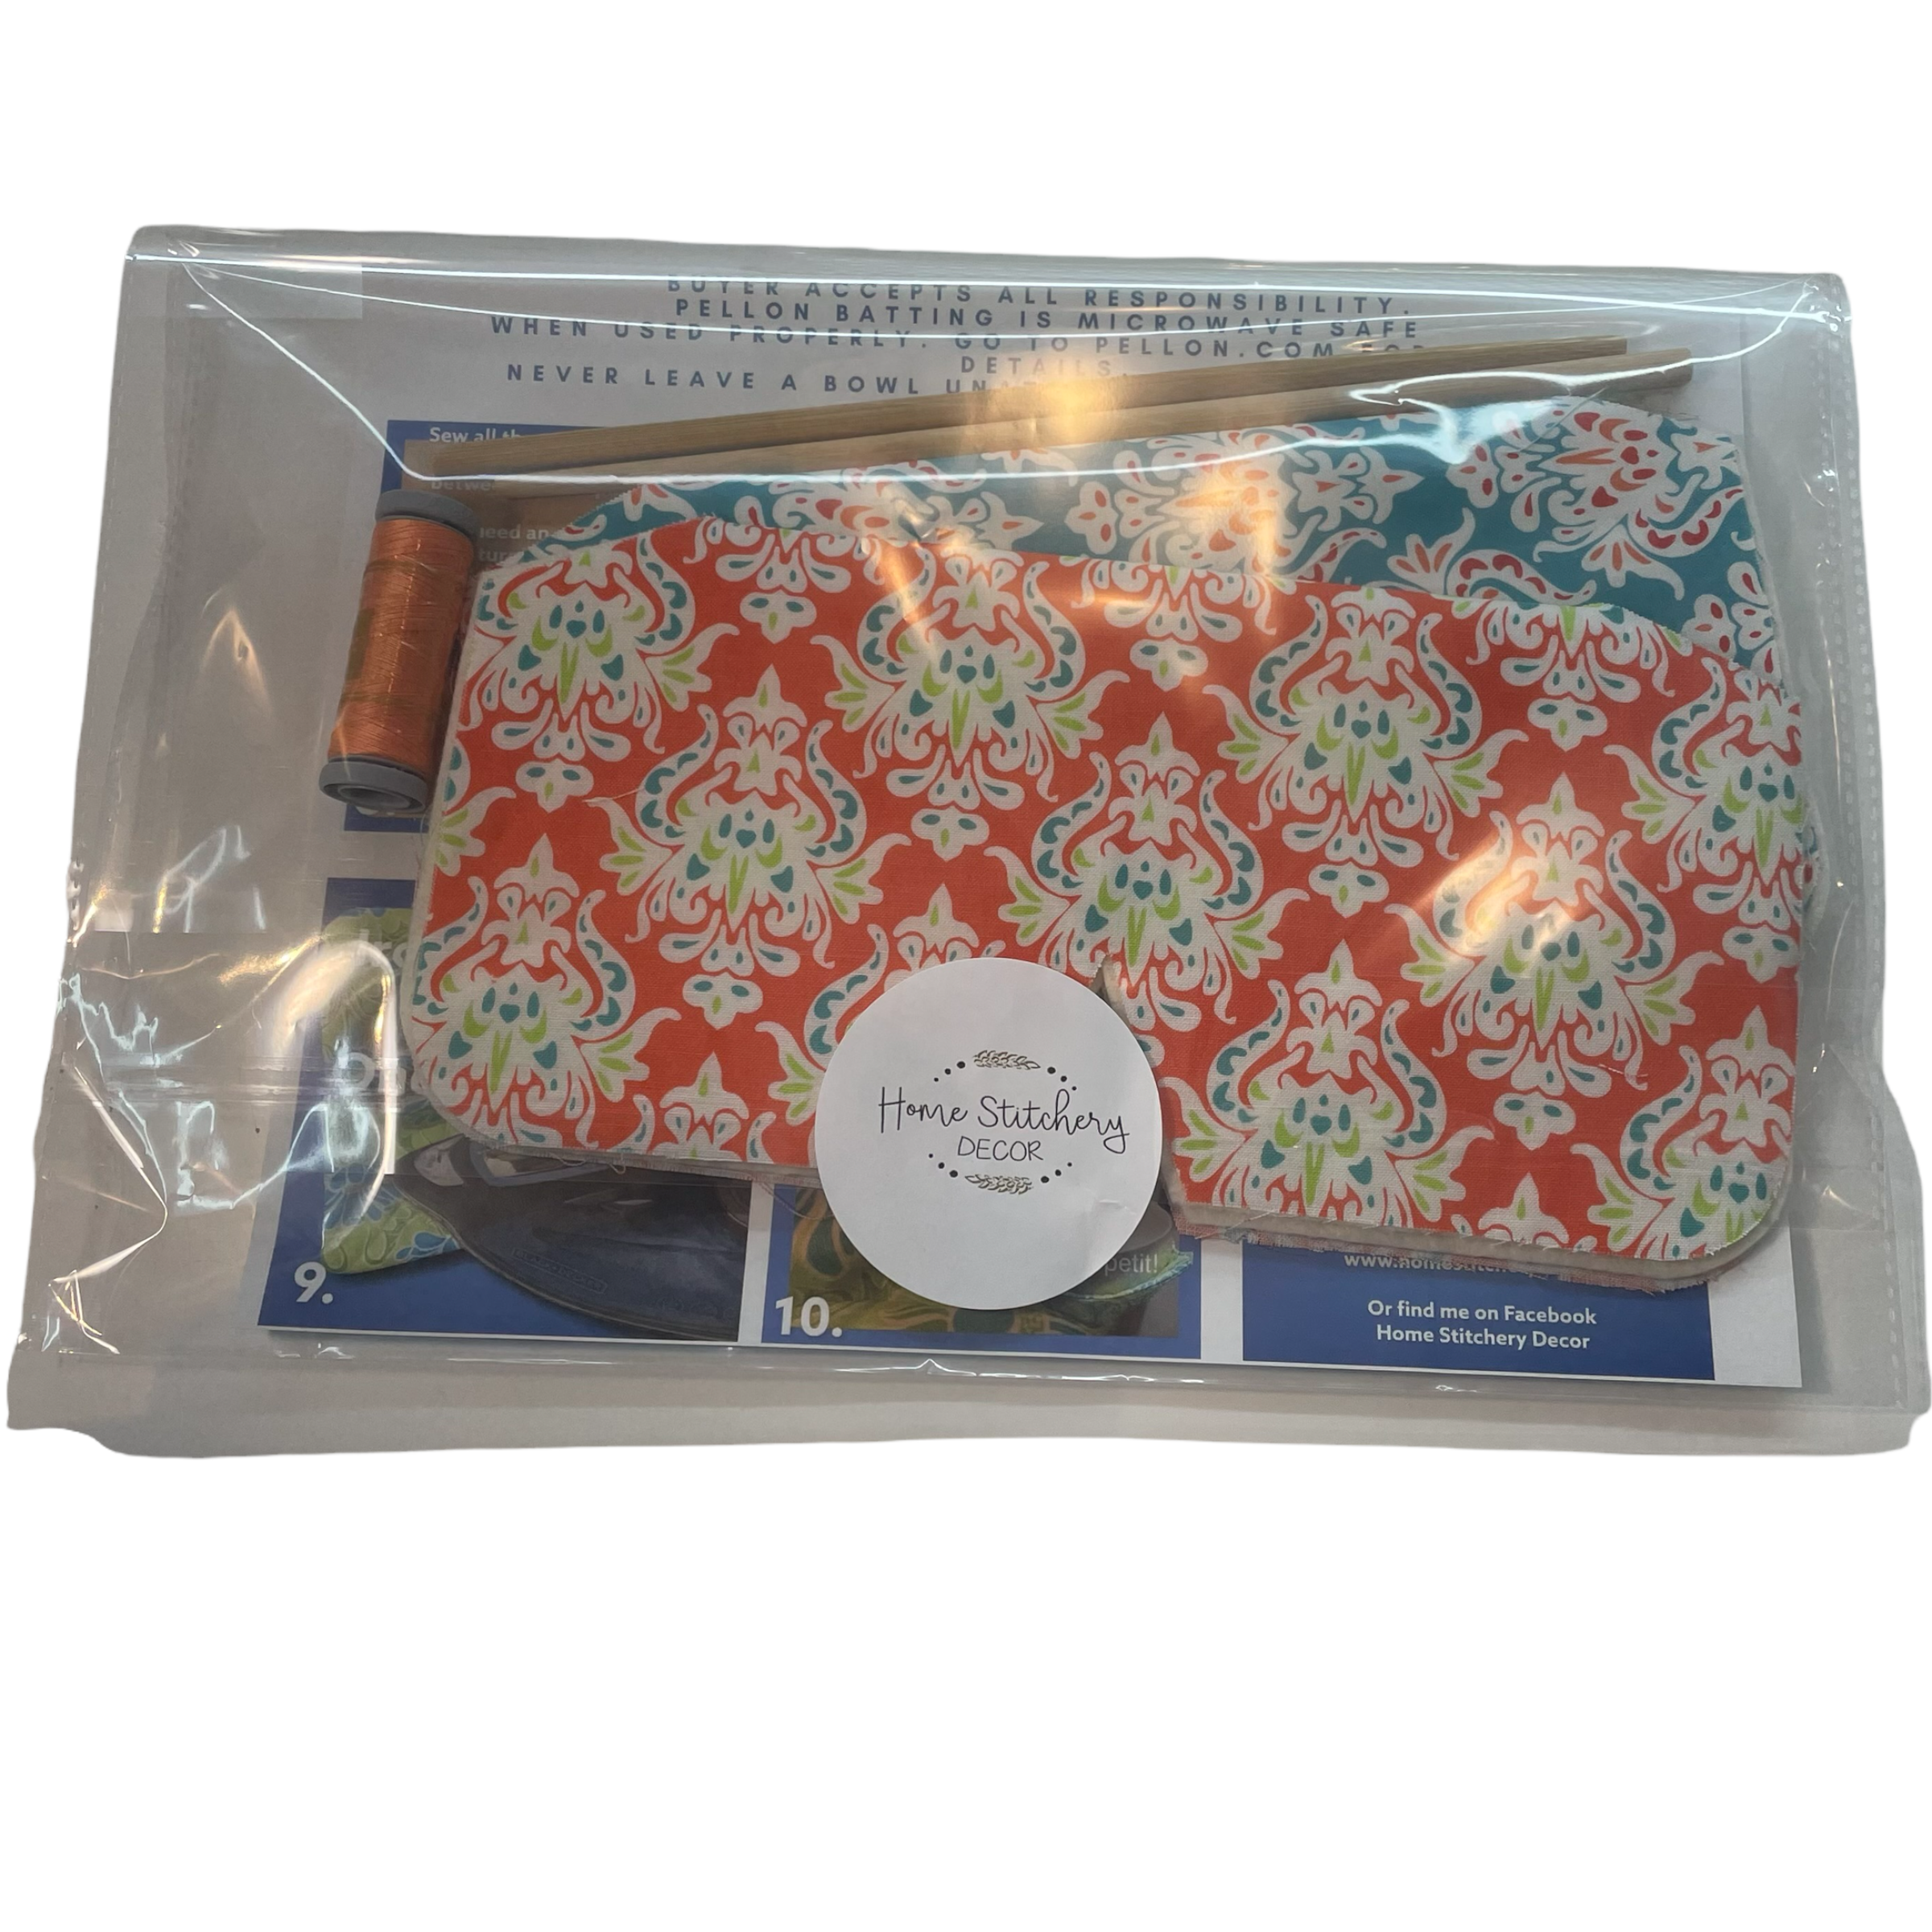 Soup Bowl Cozy Sewing Kit. Easy sewing kit for beginners. Learn to sew –  Home Stitchery Decor